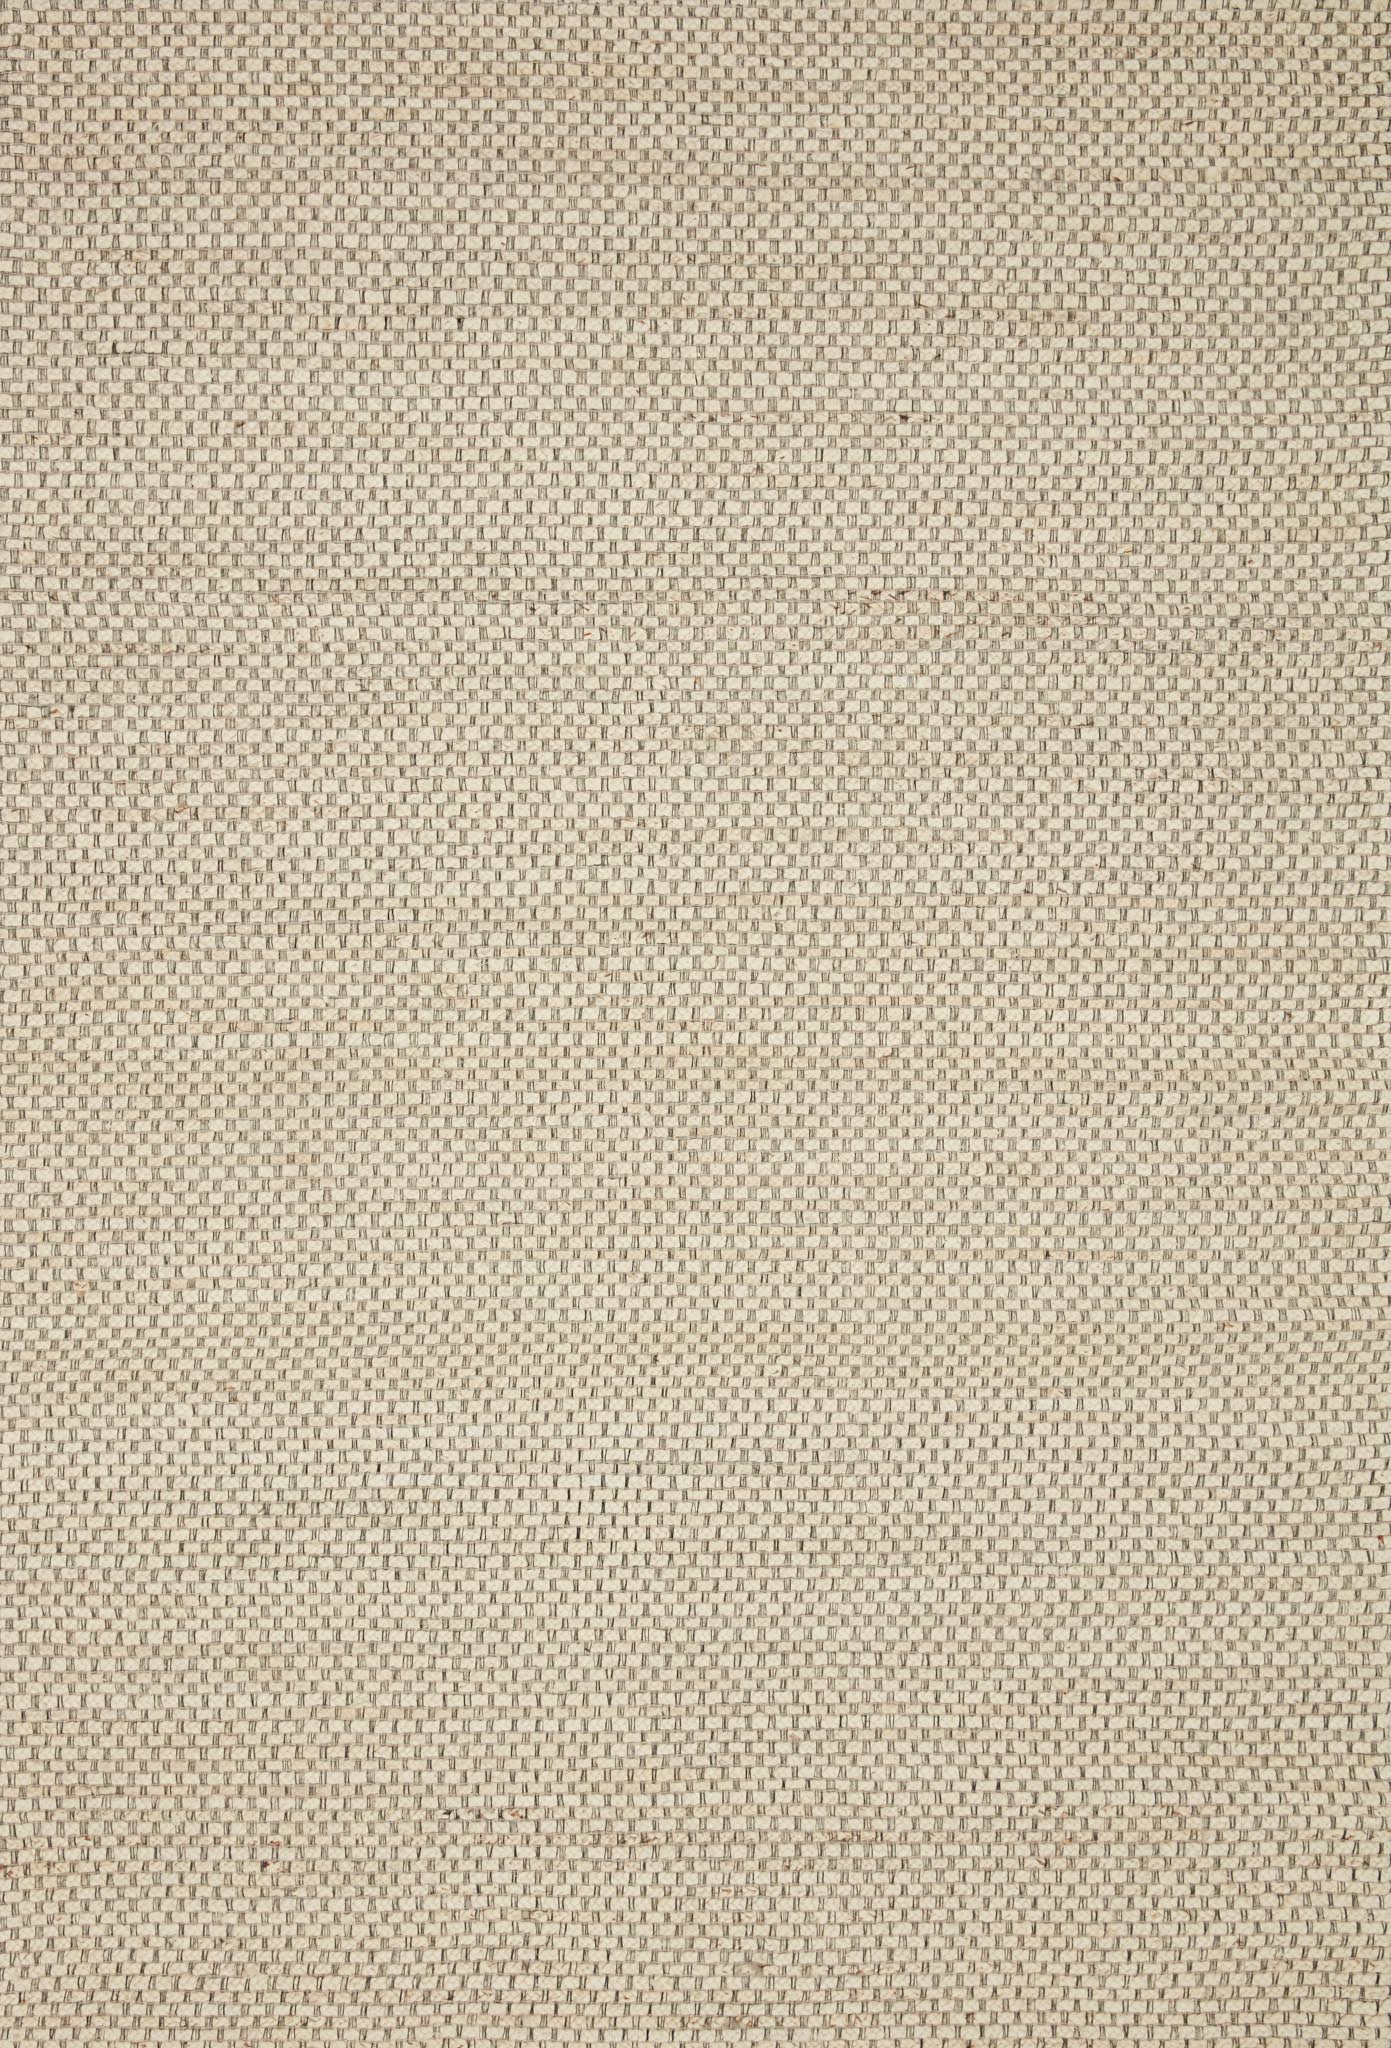 Loloi Lily LIL-01 Ivory Area Rug